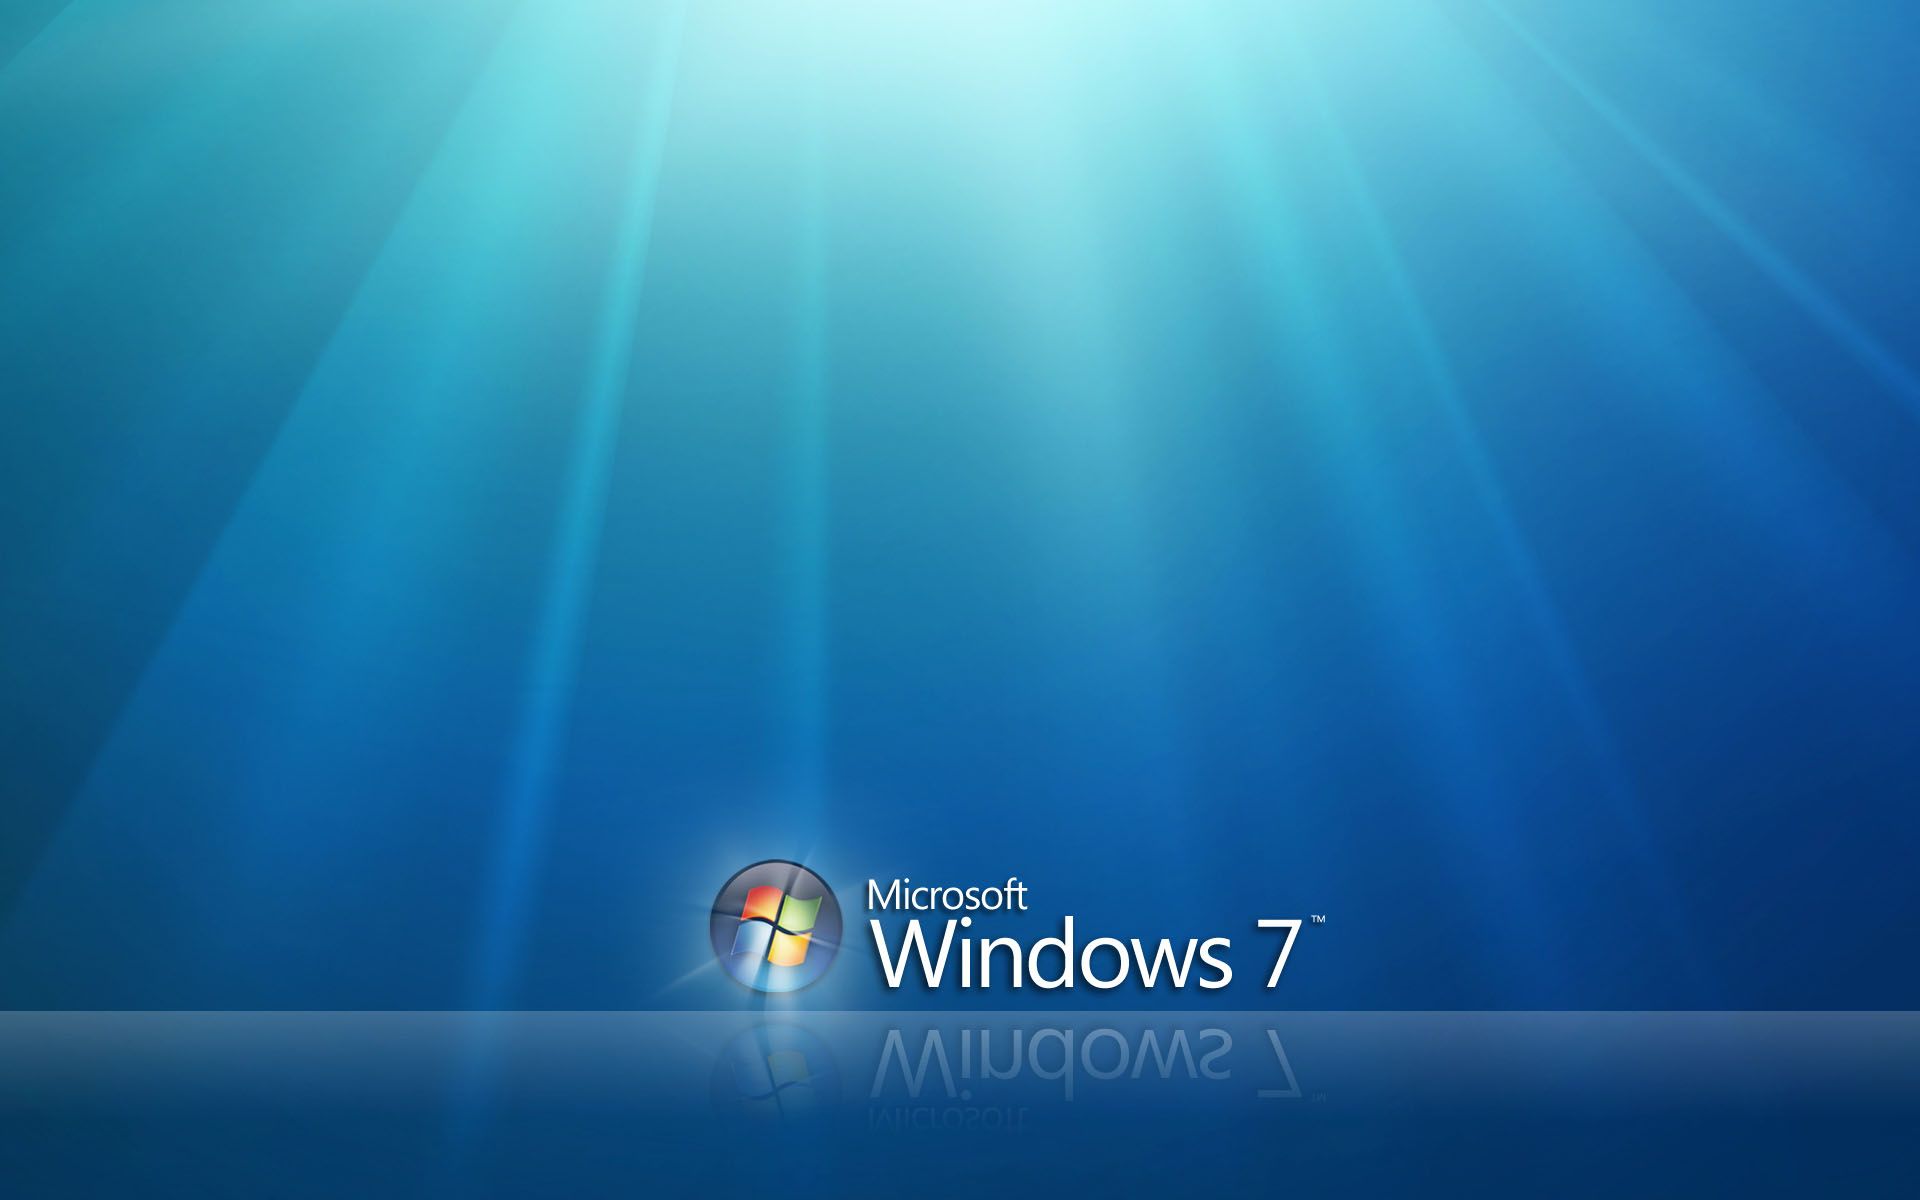 50 Spectacular HQ Windows 7 Wallpapers to Spice Up Your Desktop